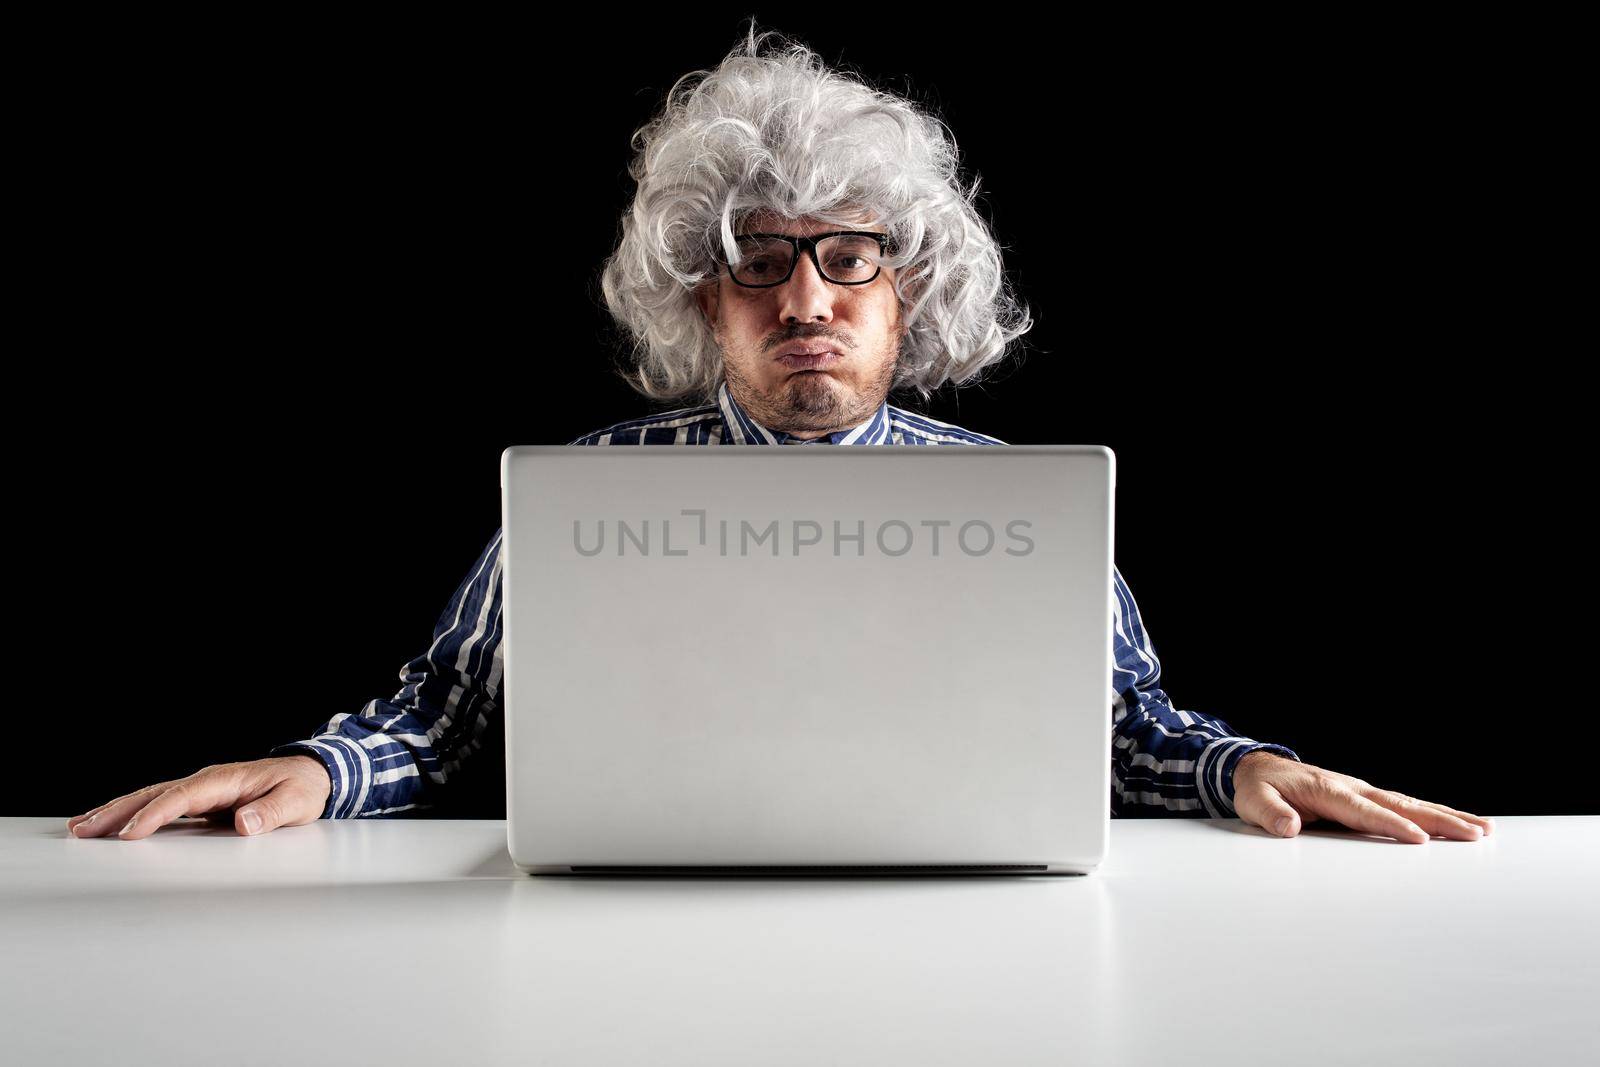 An old man boomer sitting on the desk snorting while using a computer notebook on black background